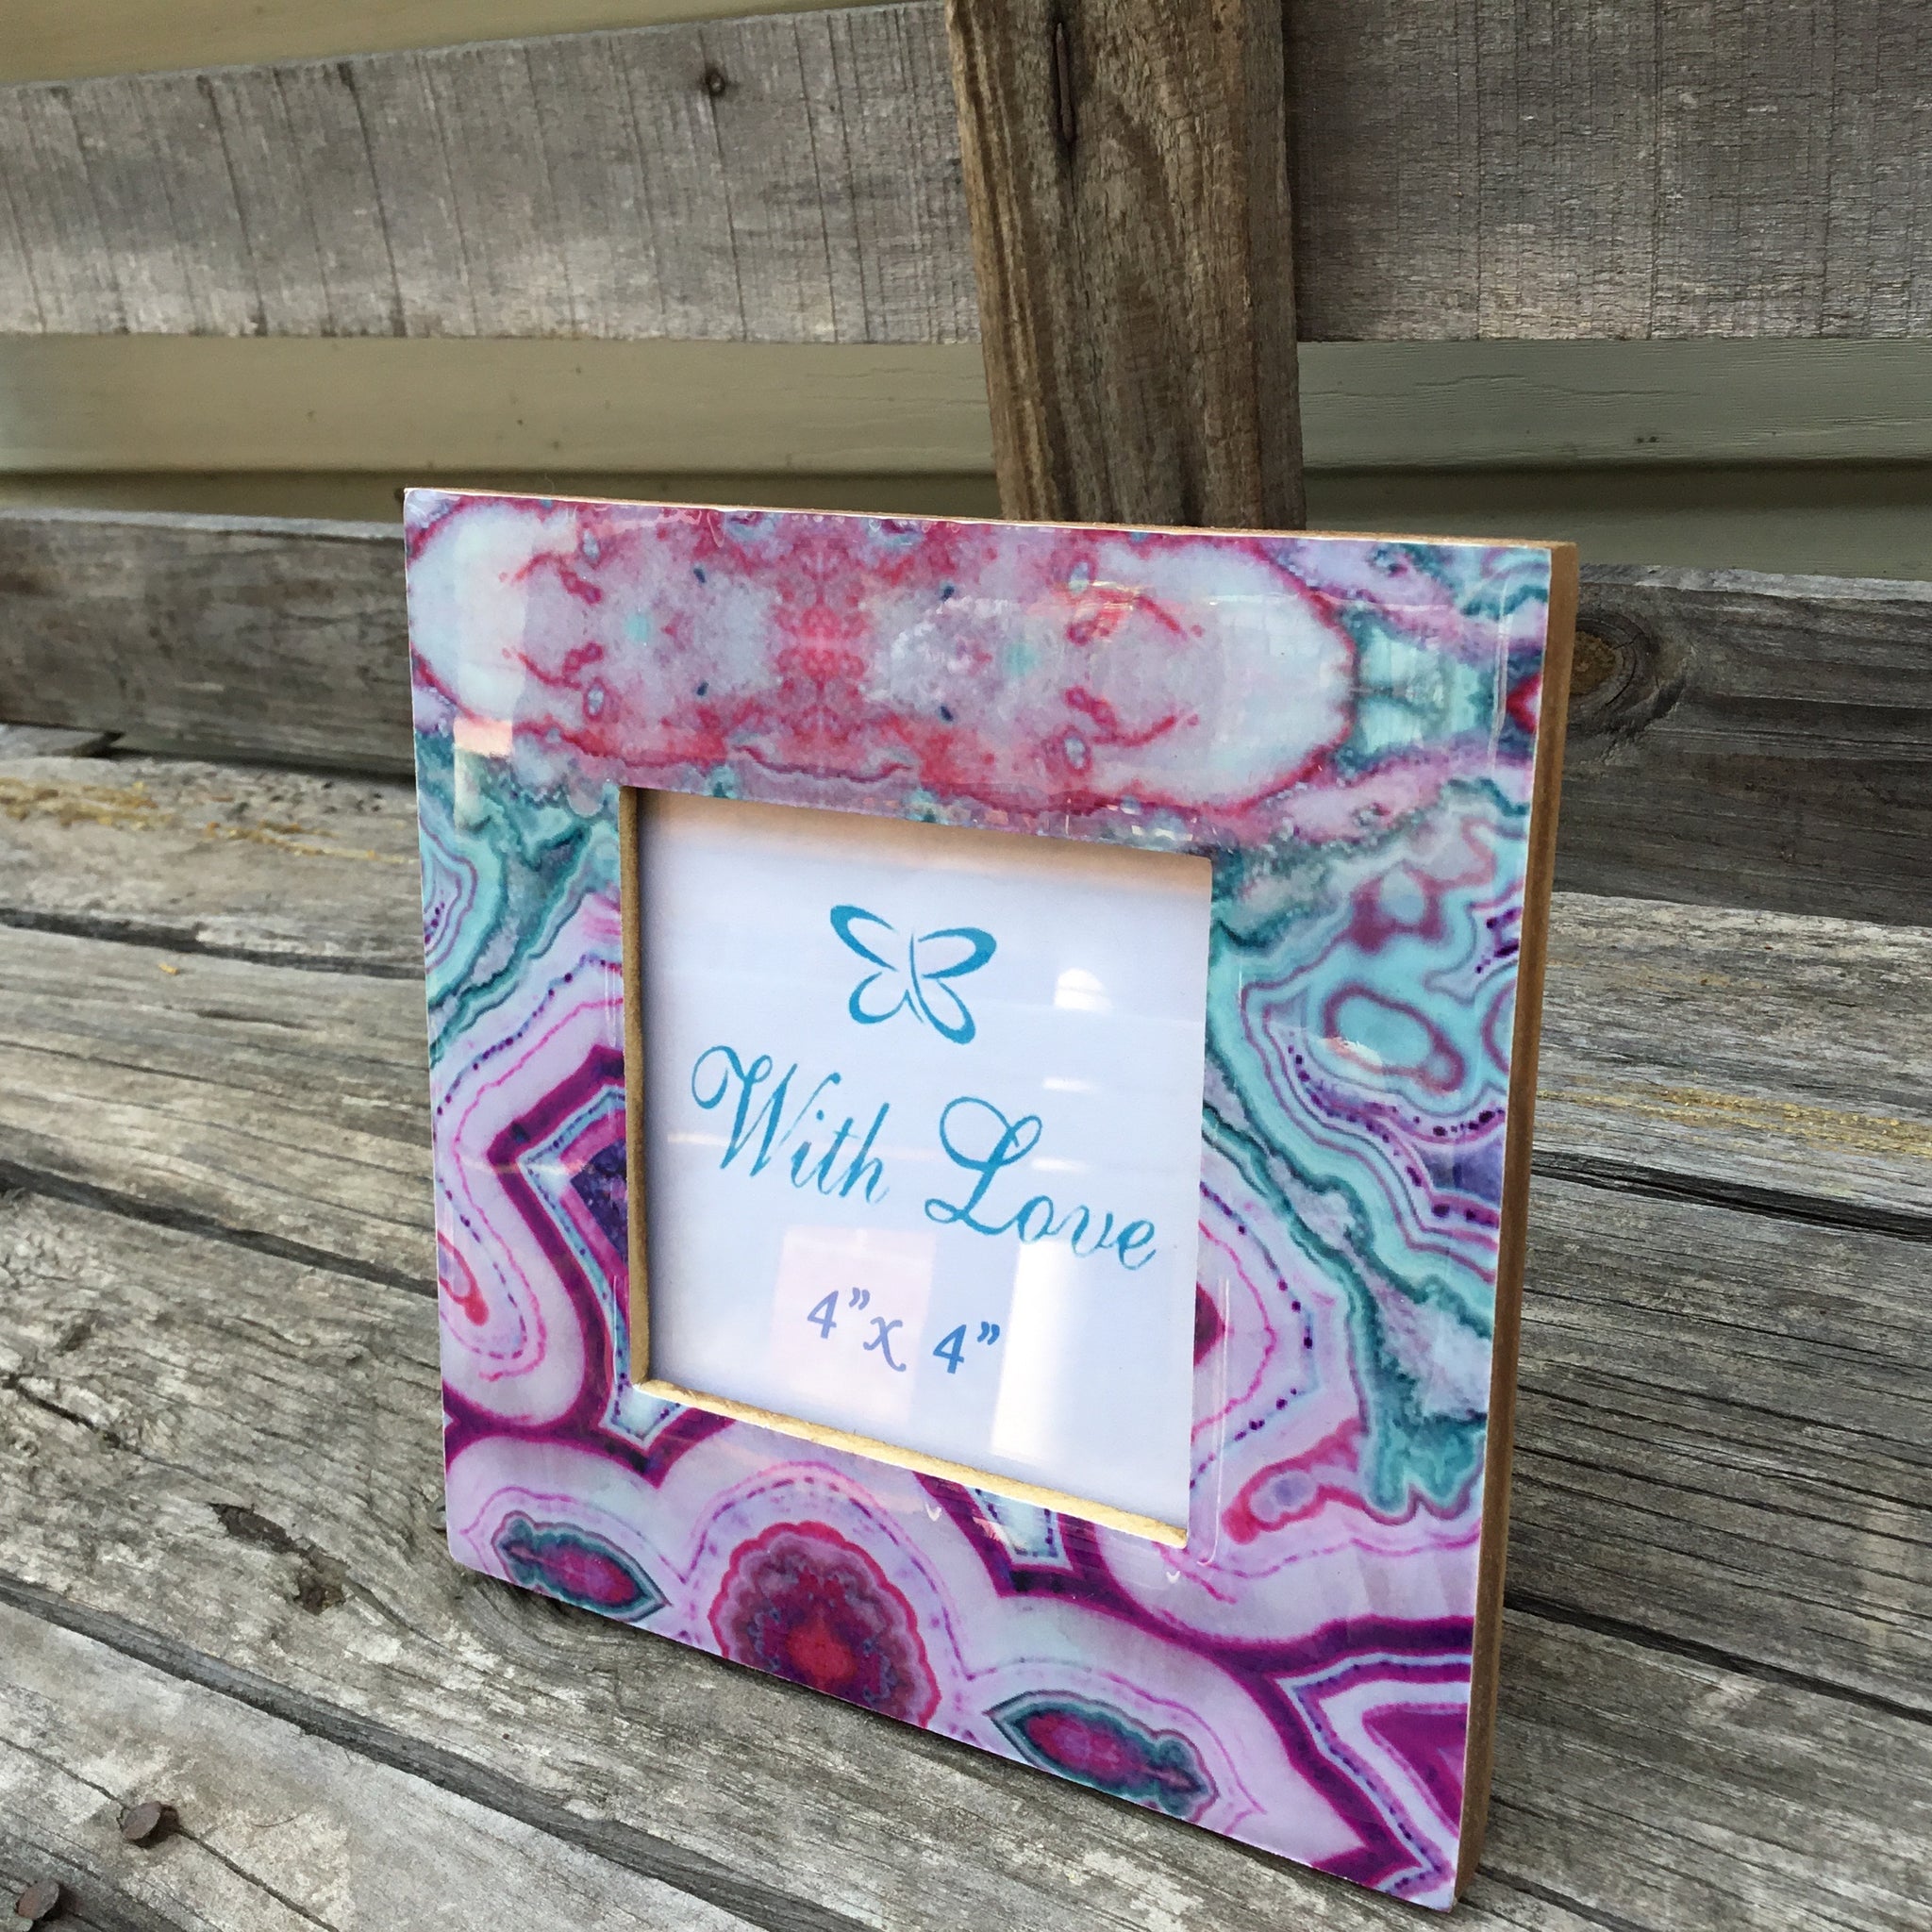 Fair Trade Ethical Resin and Wood Photo Frame Shade Design